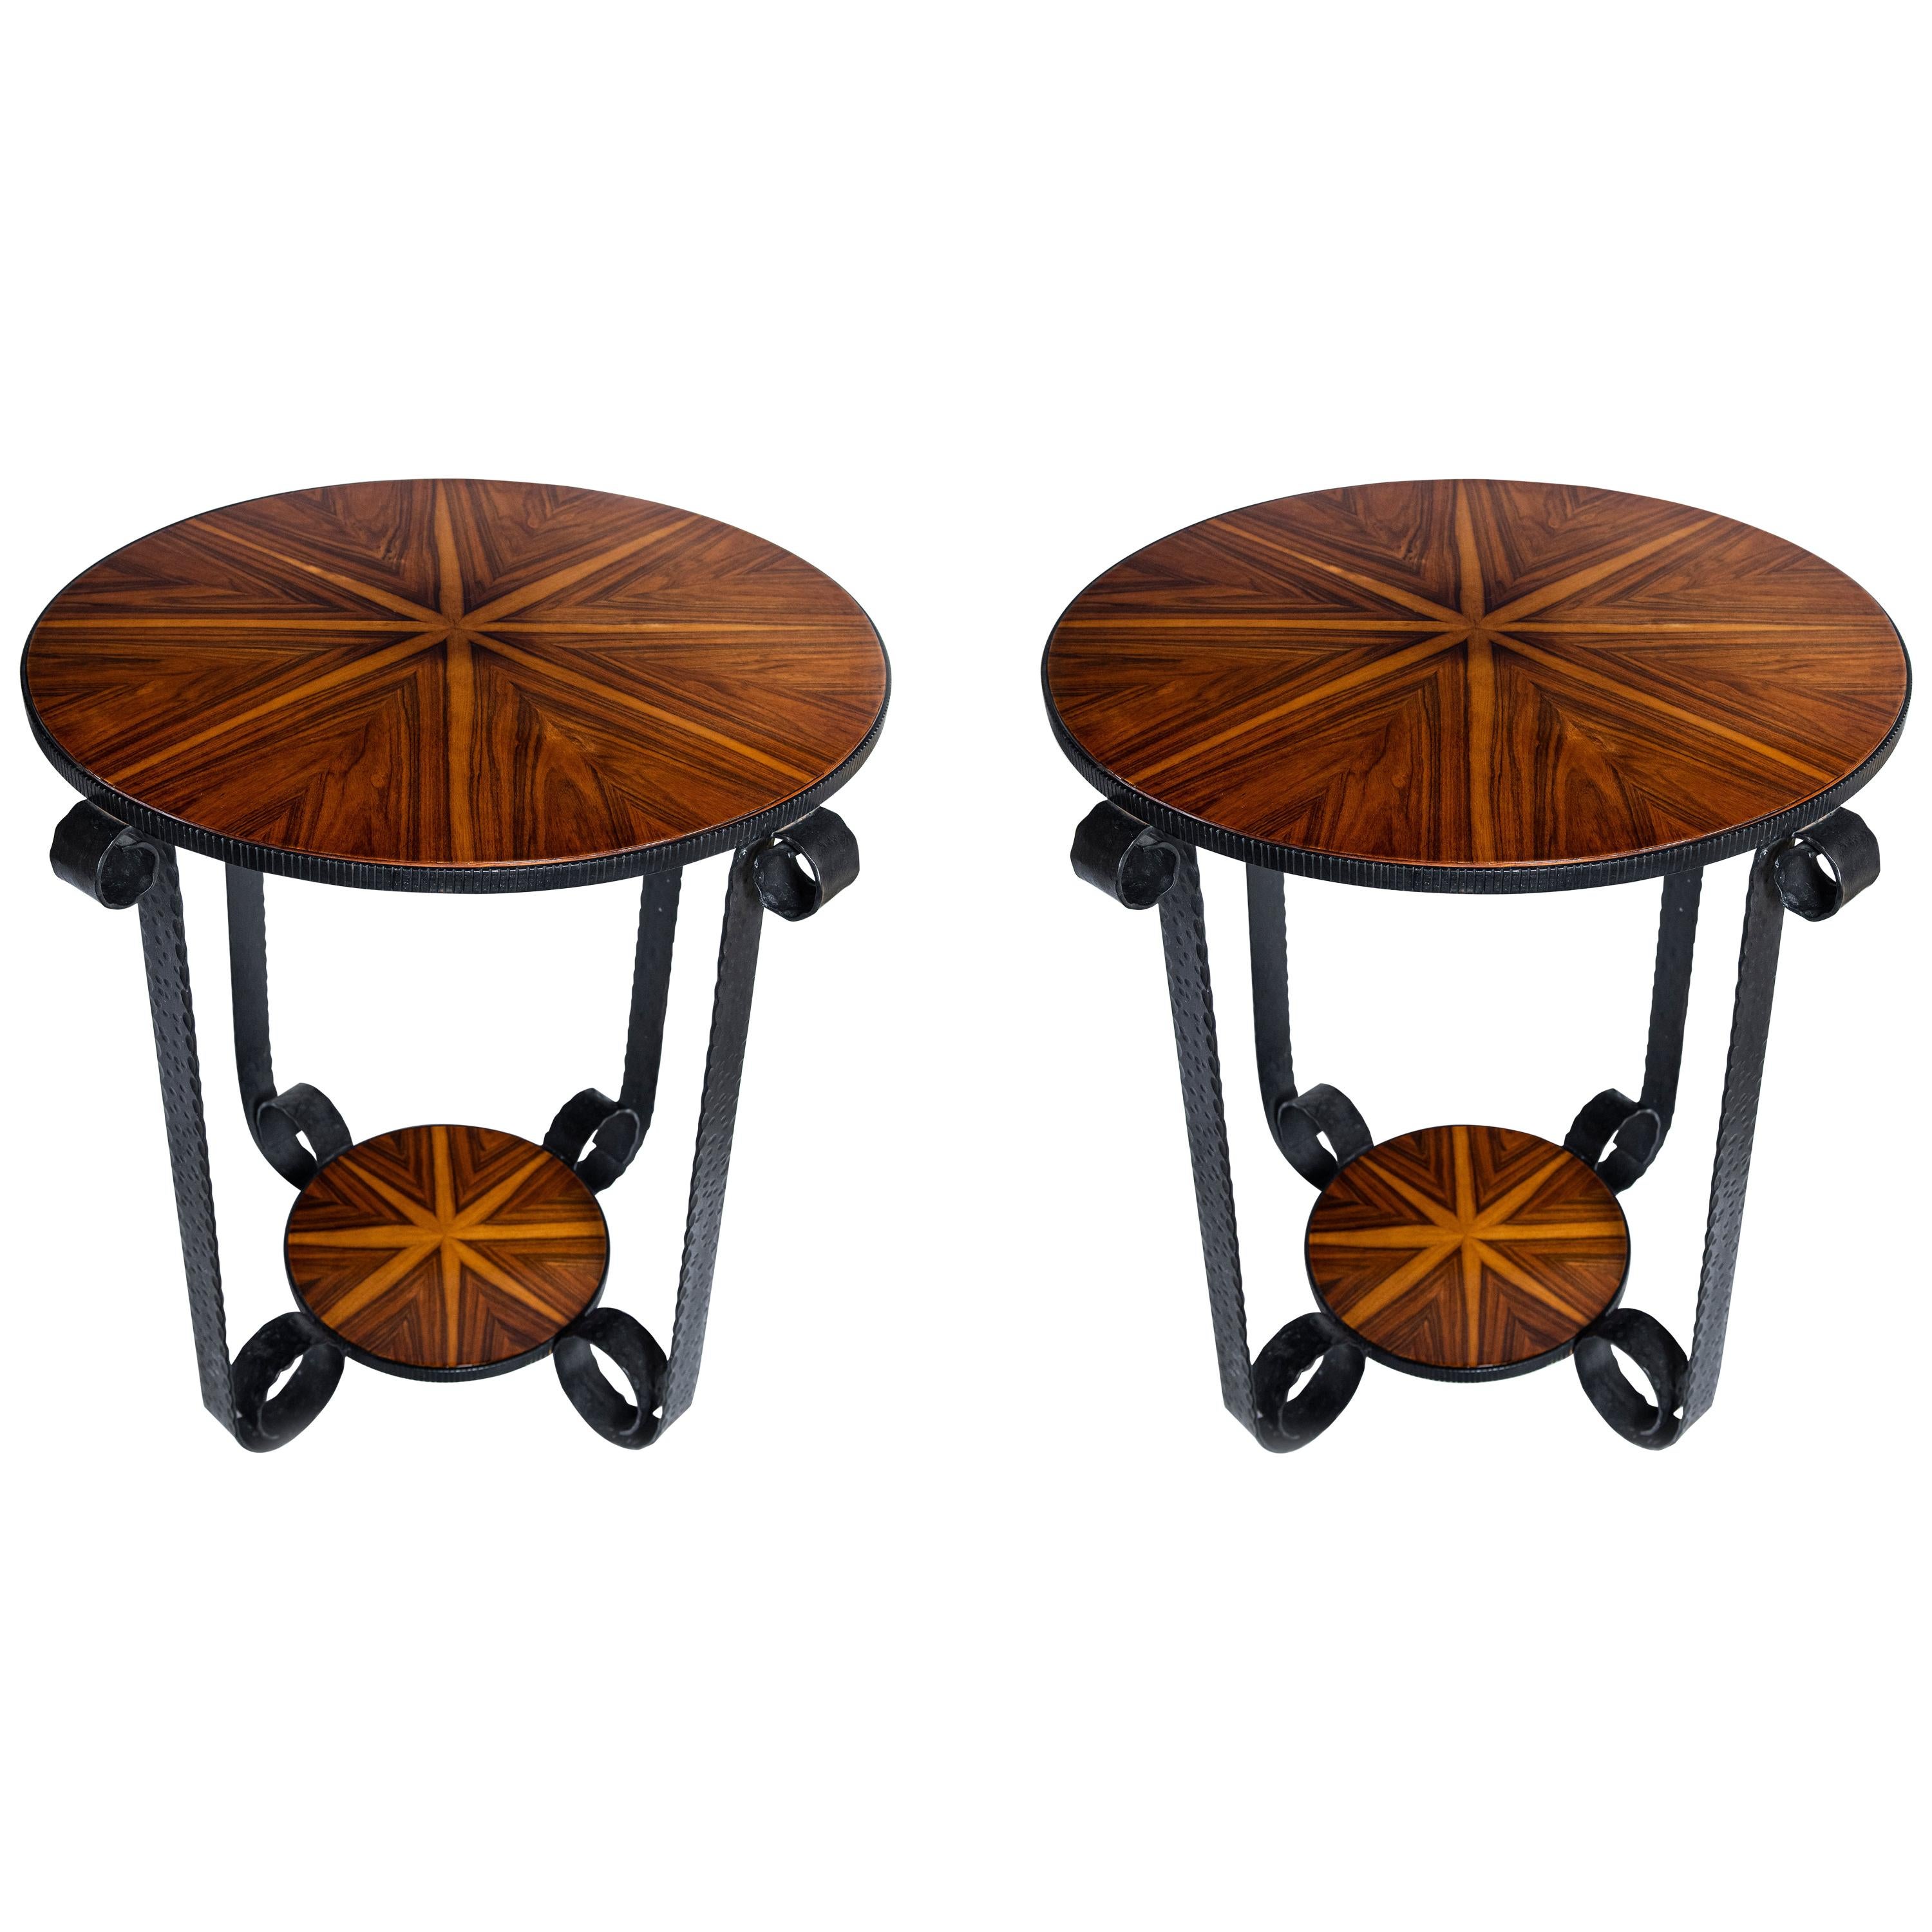 Pair of Wood and Iron Side Tables, Art Deco Period, France, circa 1930 For Sale